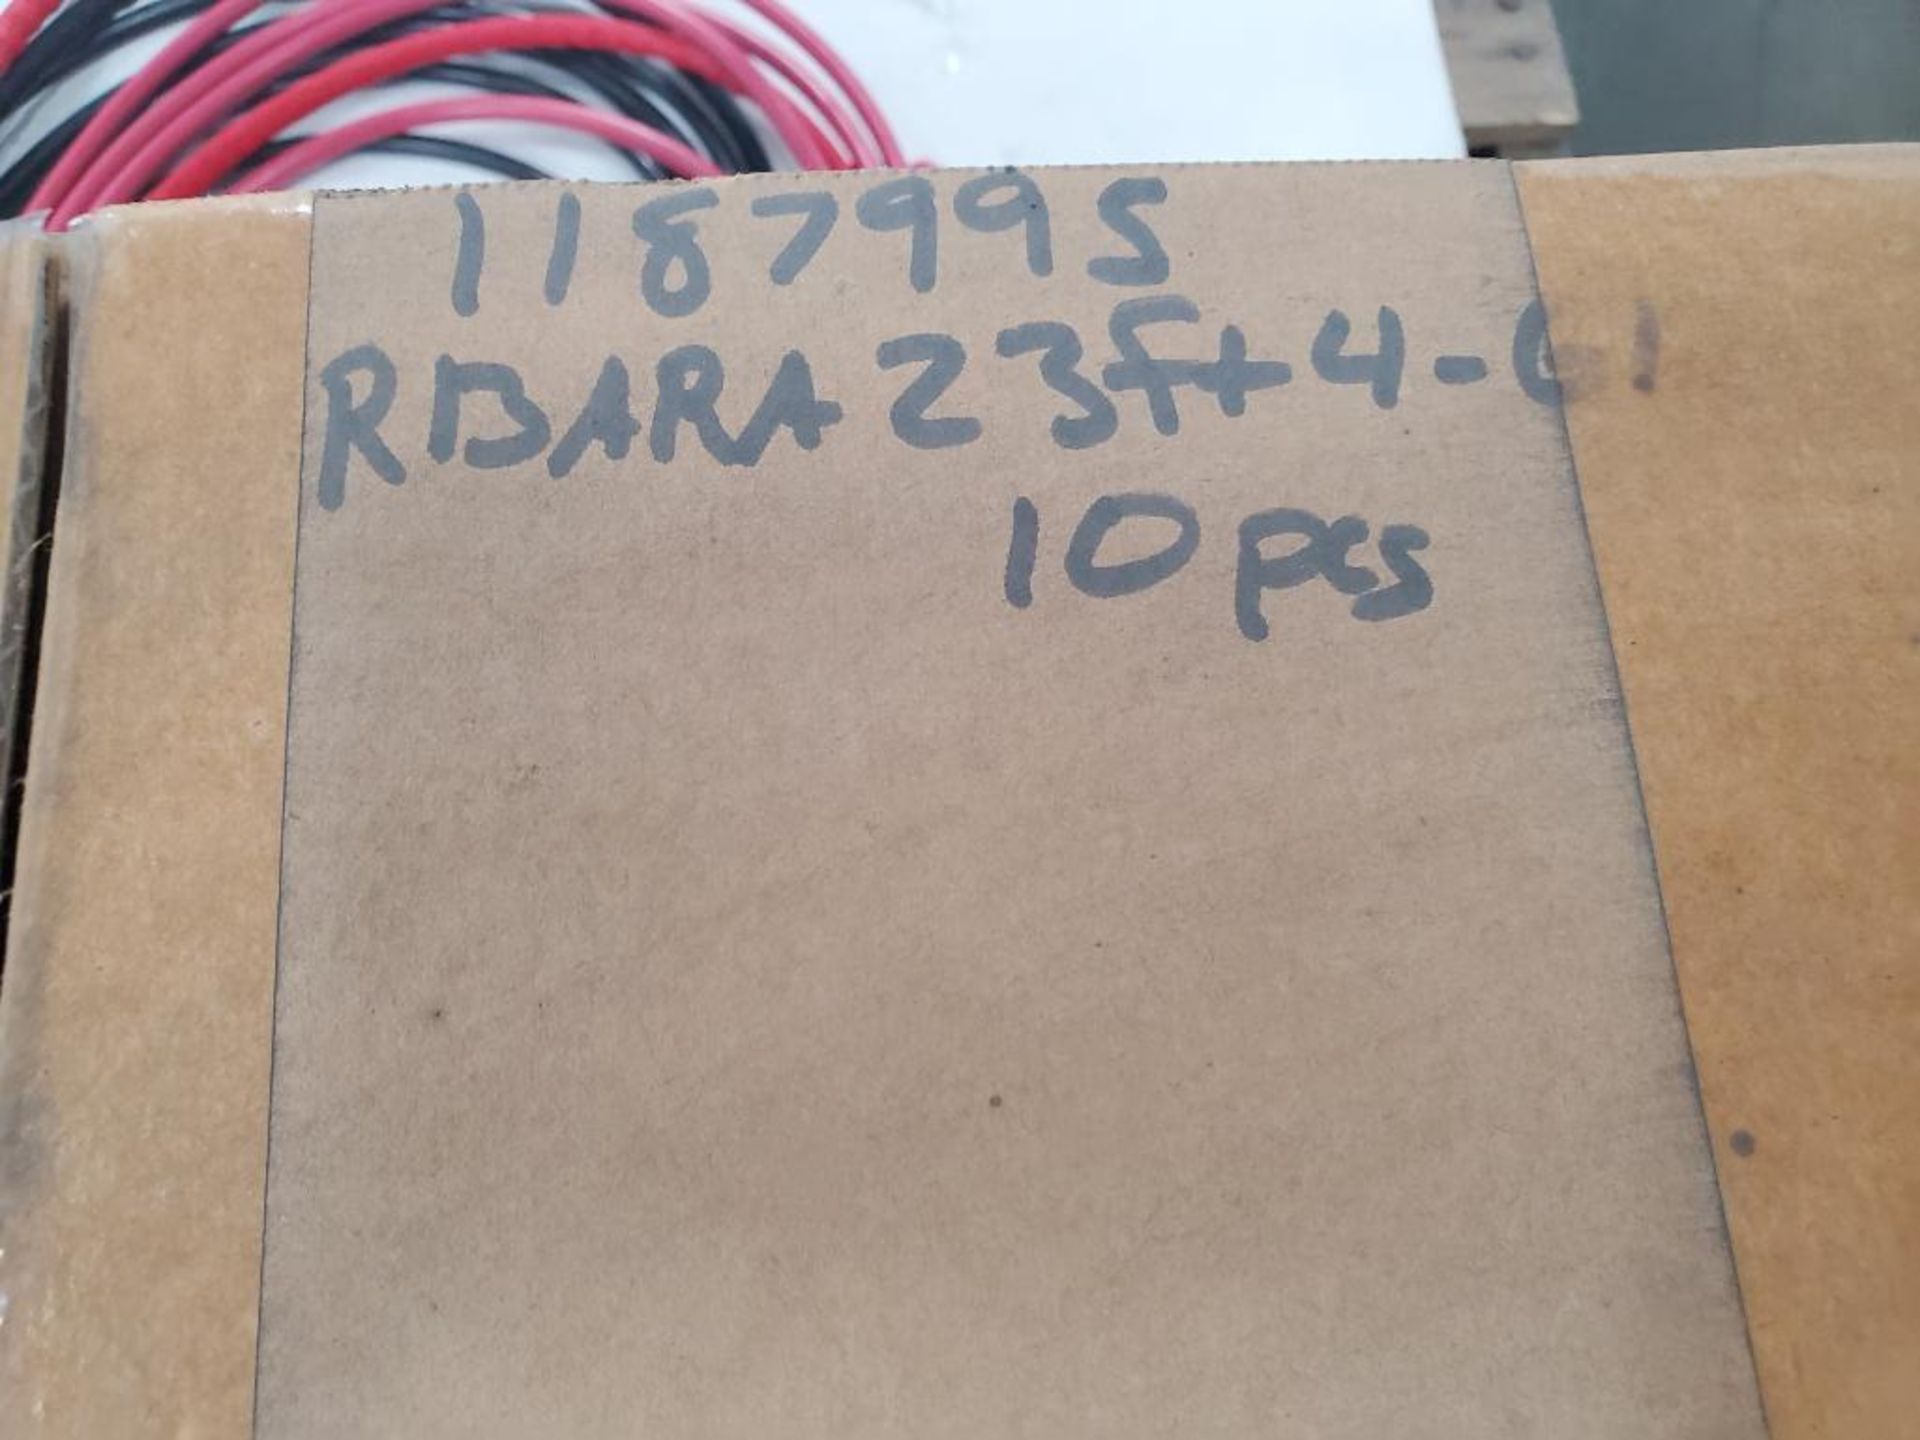 Qty 10 - Anderson 23ft battery adapter cable. RBARA23FT4-G1. 175A, 600V plug. New in box. - Image 3 of 7